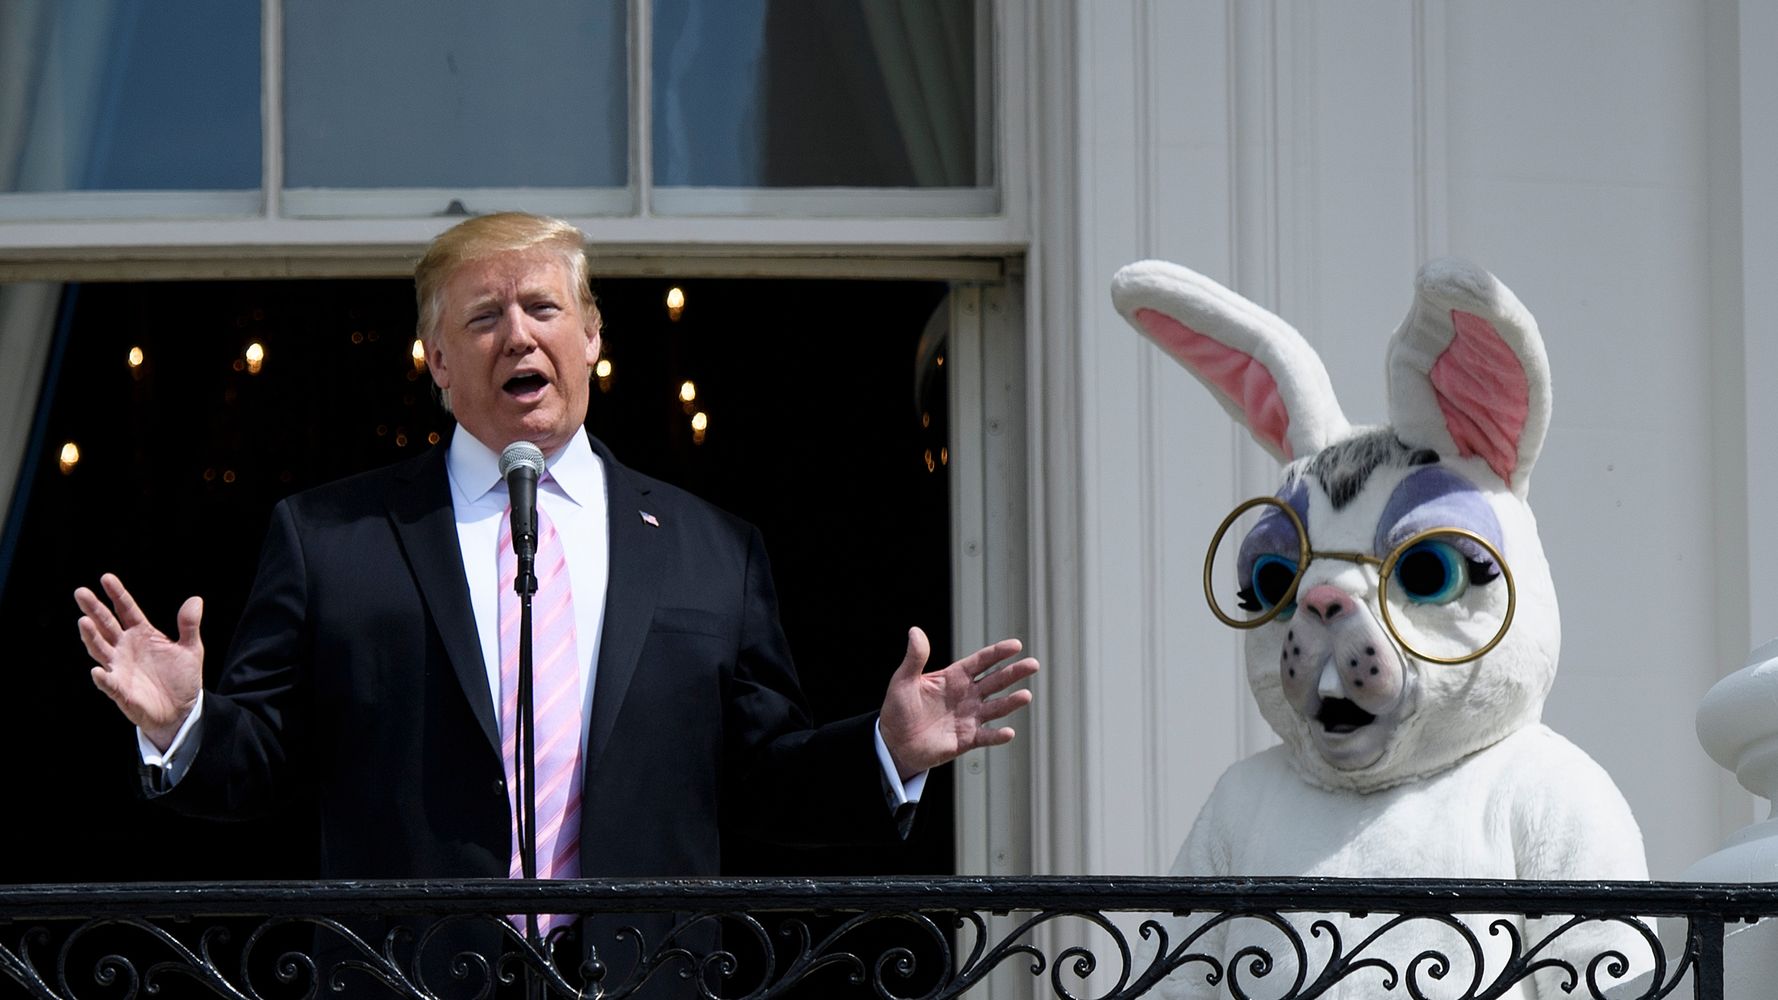 Donald Trump’s latest election rant concludes with ‘Other than that, Happy Easter’